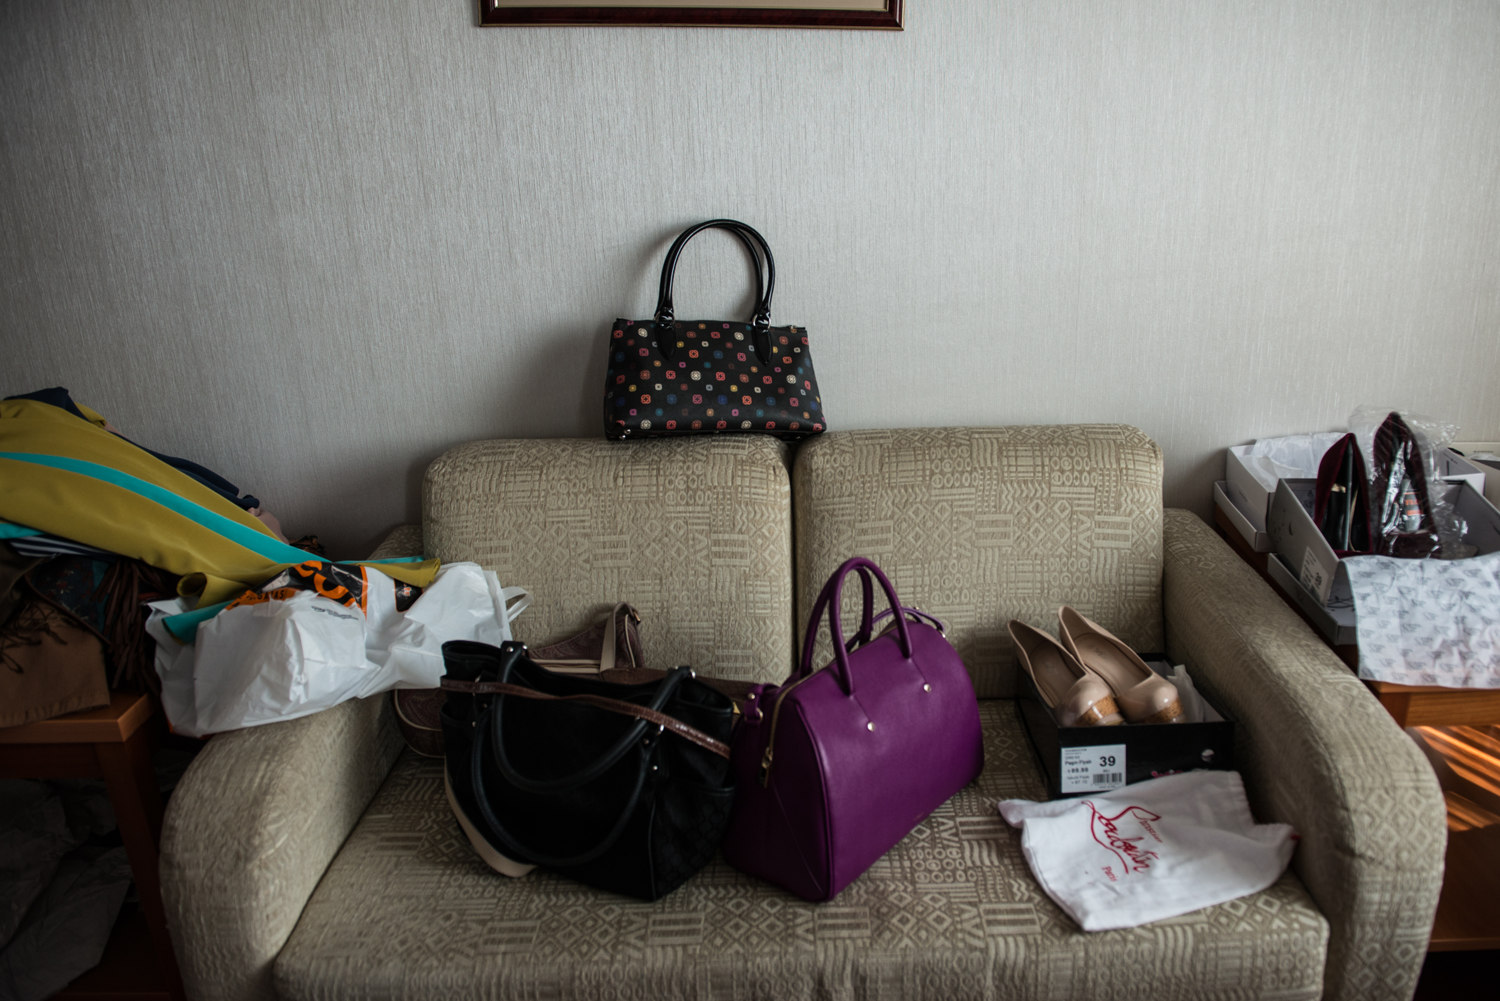  Bags and shoes to be used for a fashion shoot for ALA Magazine, the first magazine in Turkey for conservative women. 